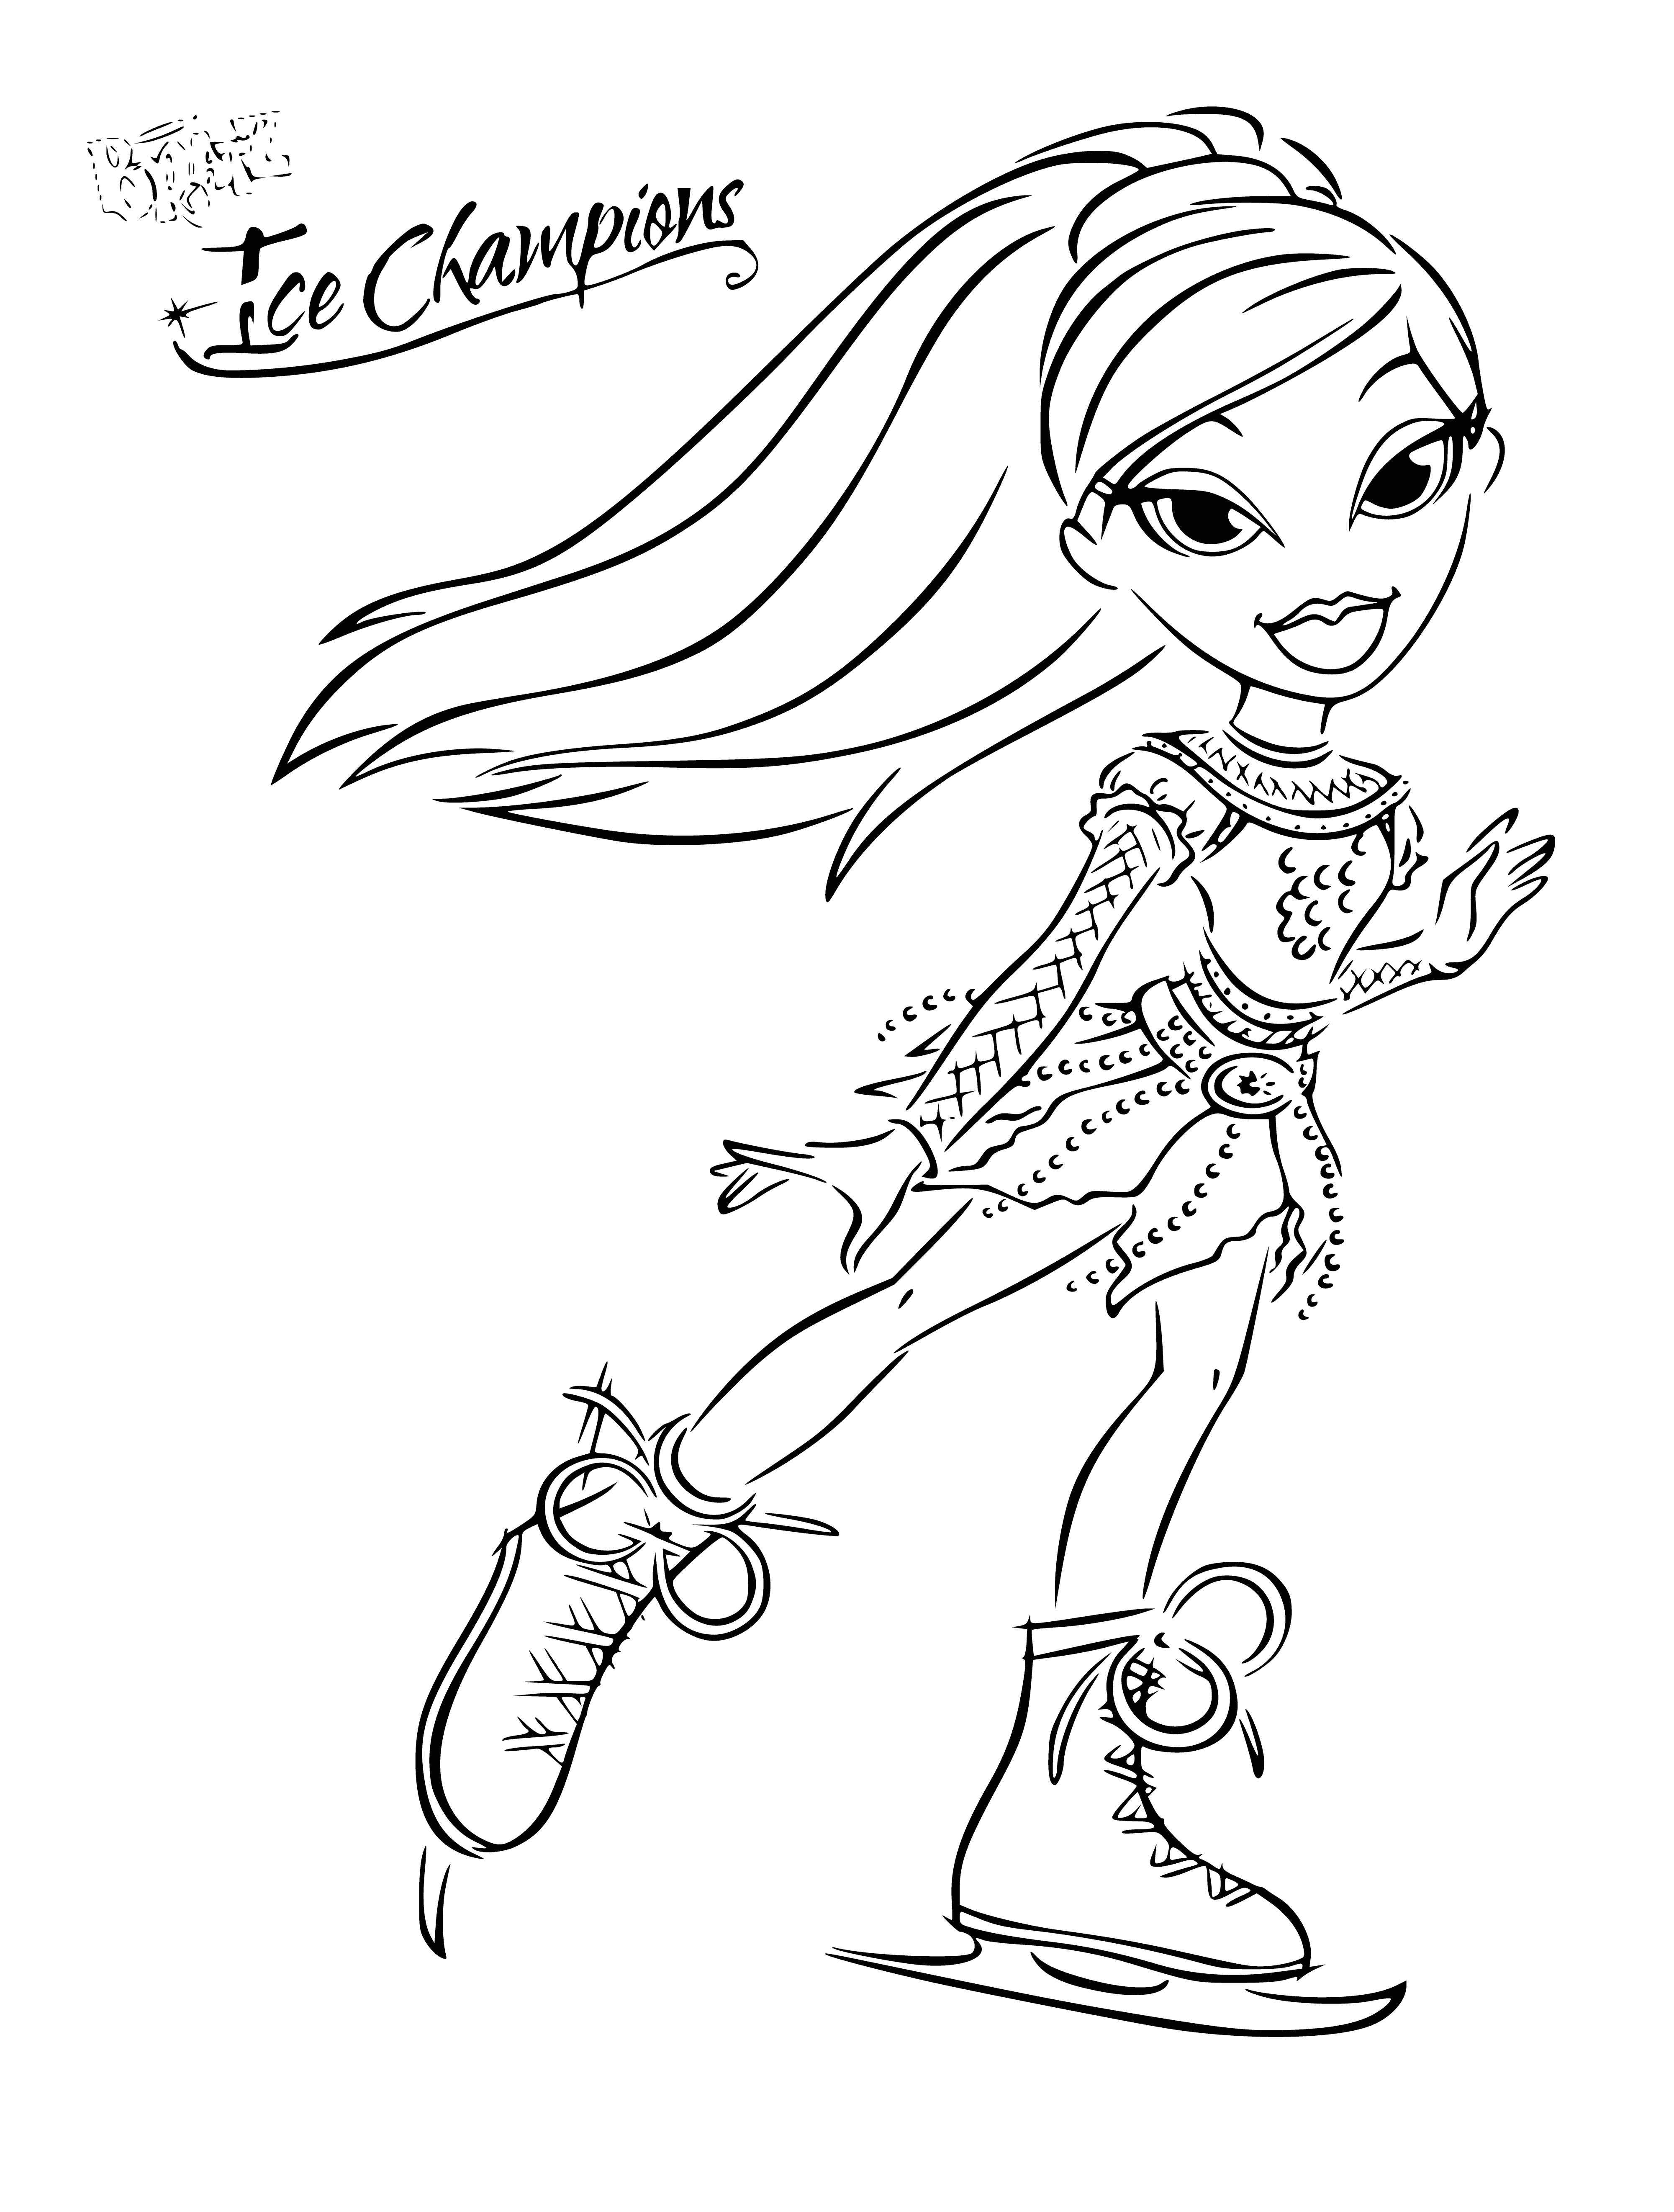 coloring page: Two Bratz dolls skating on ice, dressed in pink & blue w/ white fur trims, arms out & in pigtails.